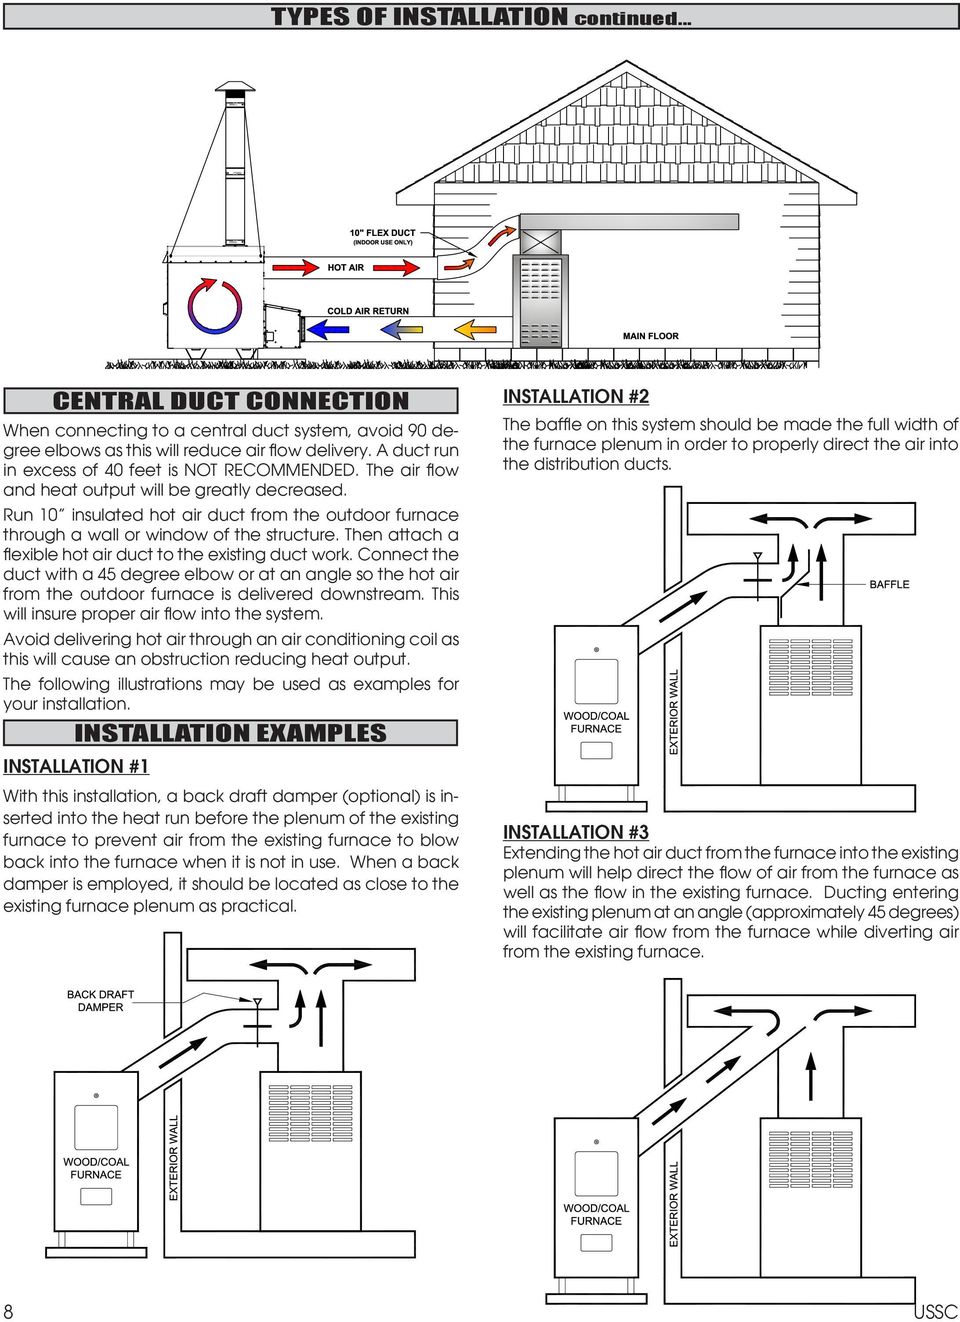 Run 10 insulated hot air duct from the outdoor furnace through a wall or window of the structure. Then attach a flexible hot air duct to the existing duct work.